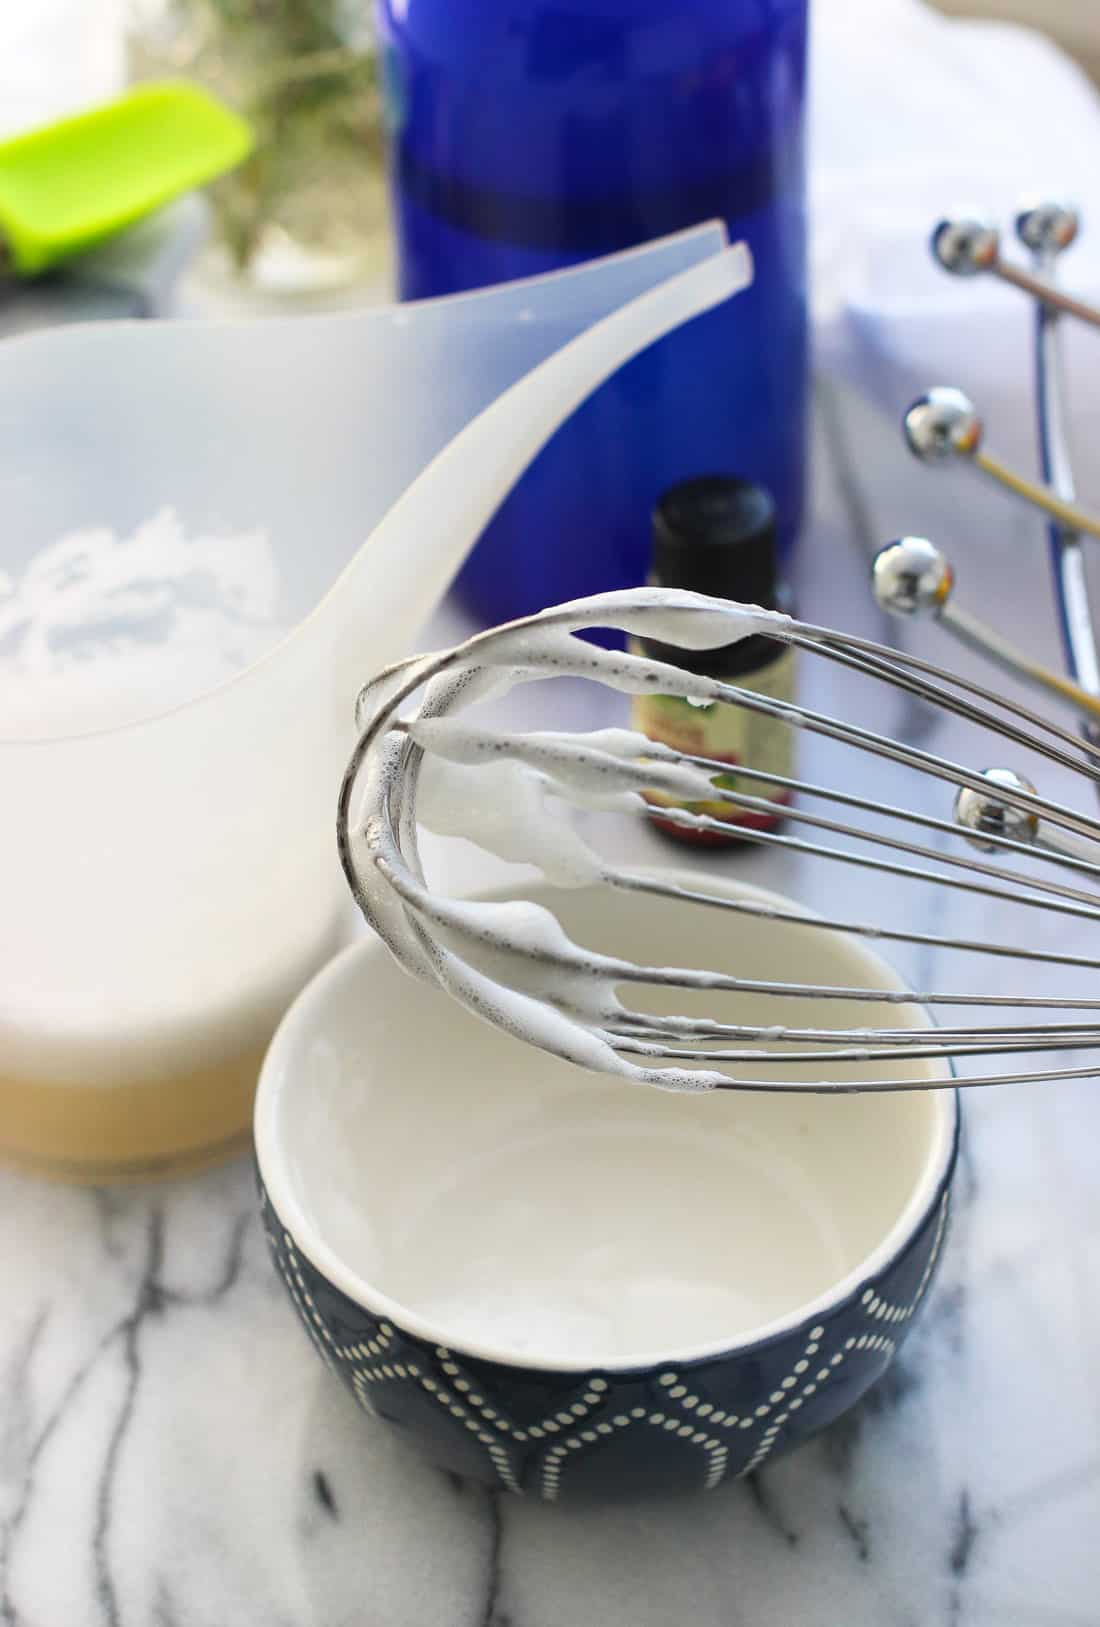 A coated whisk lifted out of a measuring cup of a soap mixture.